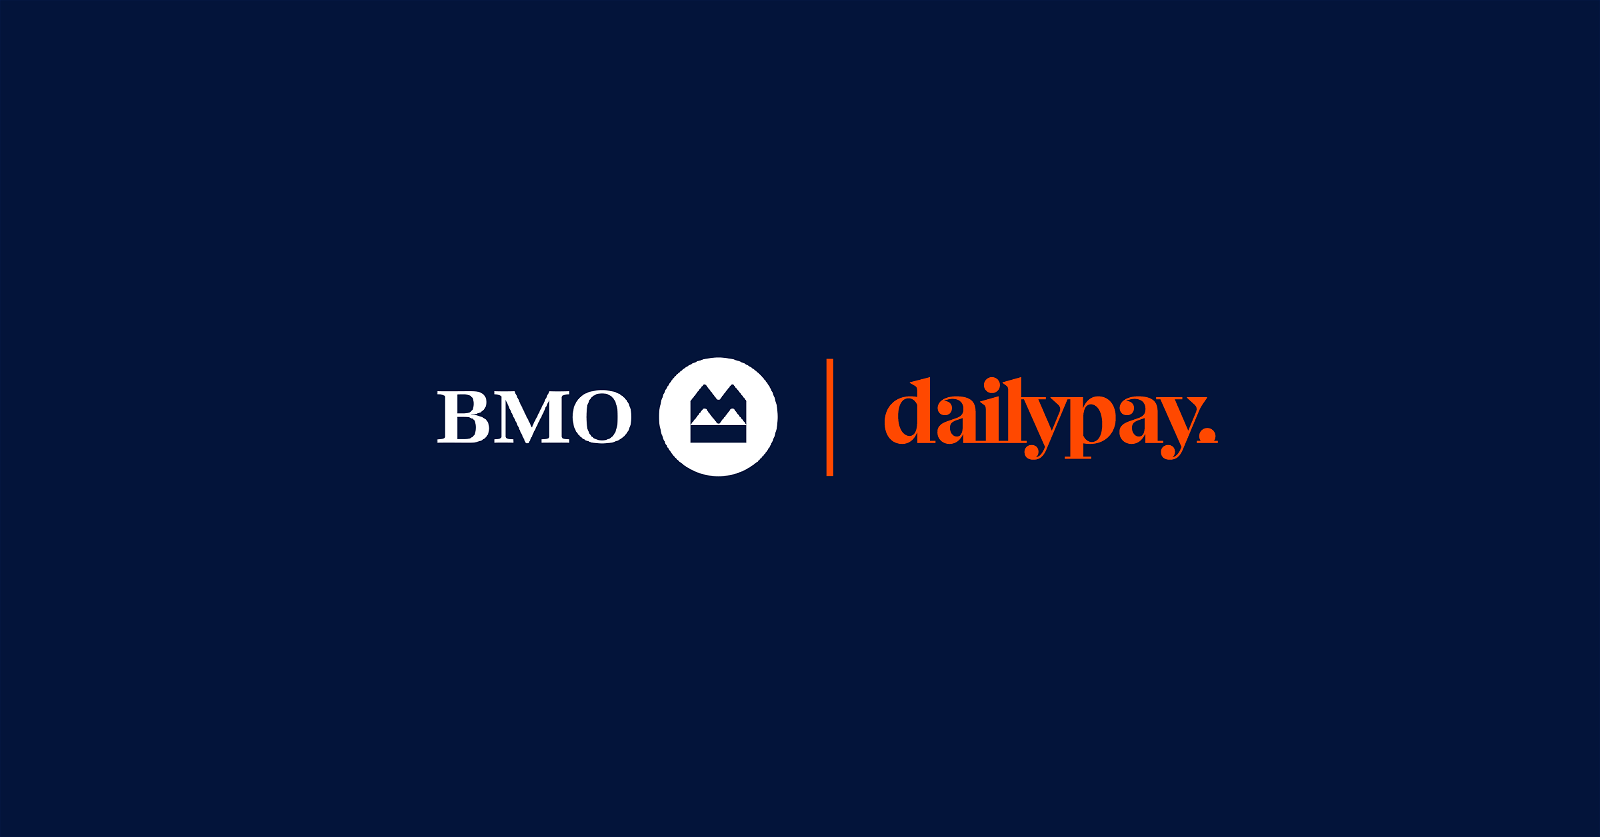 BMO and DailyPay logos on a dark blue background.